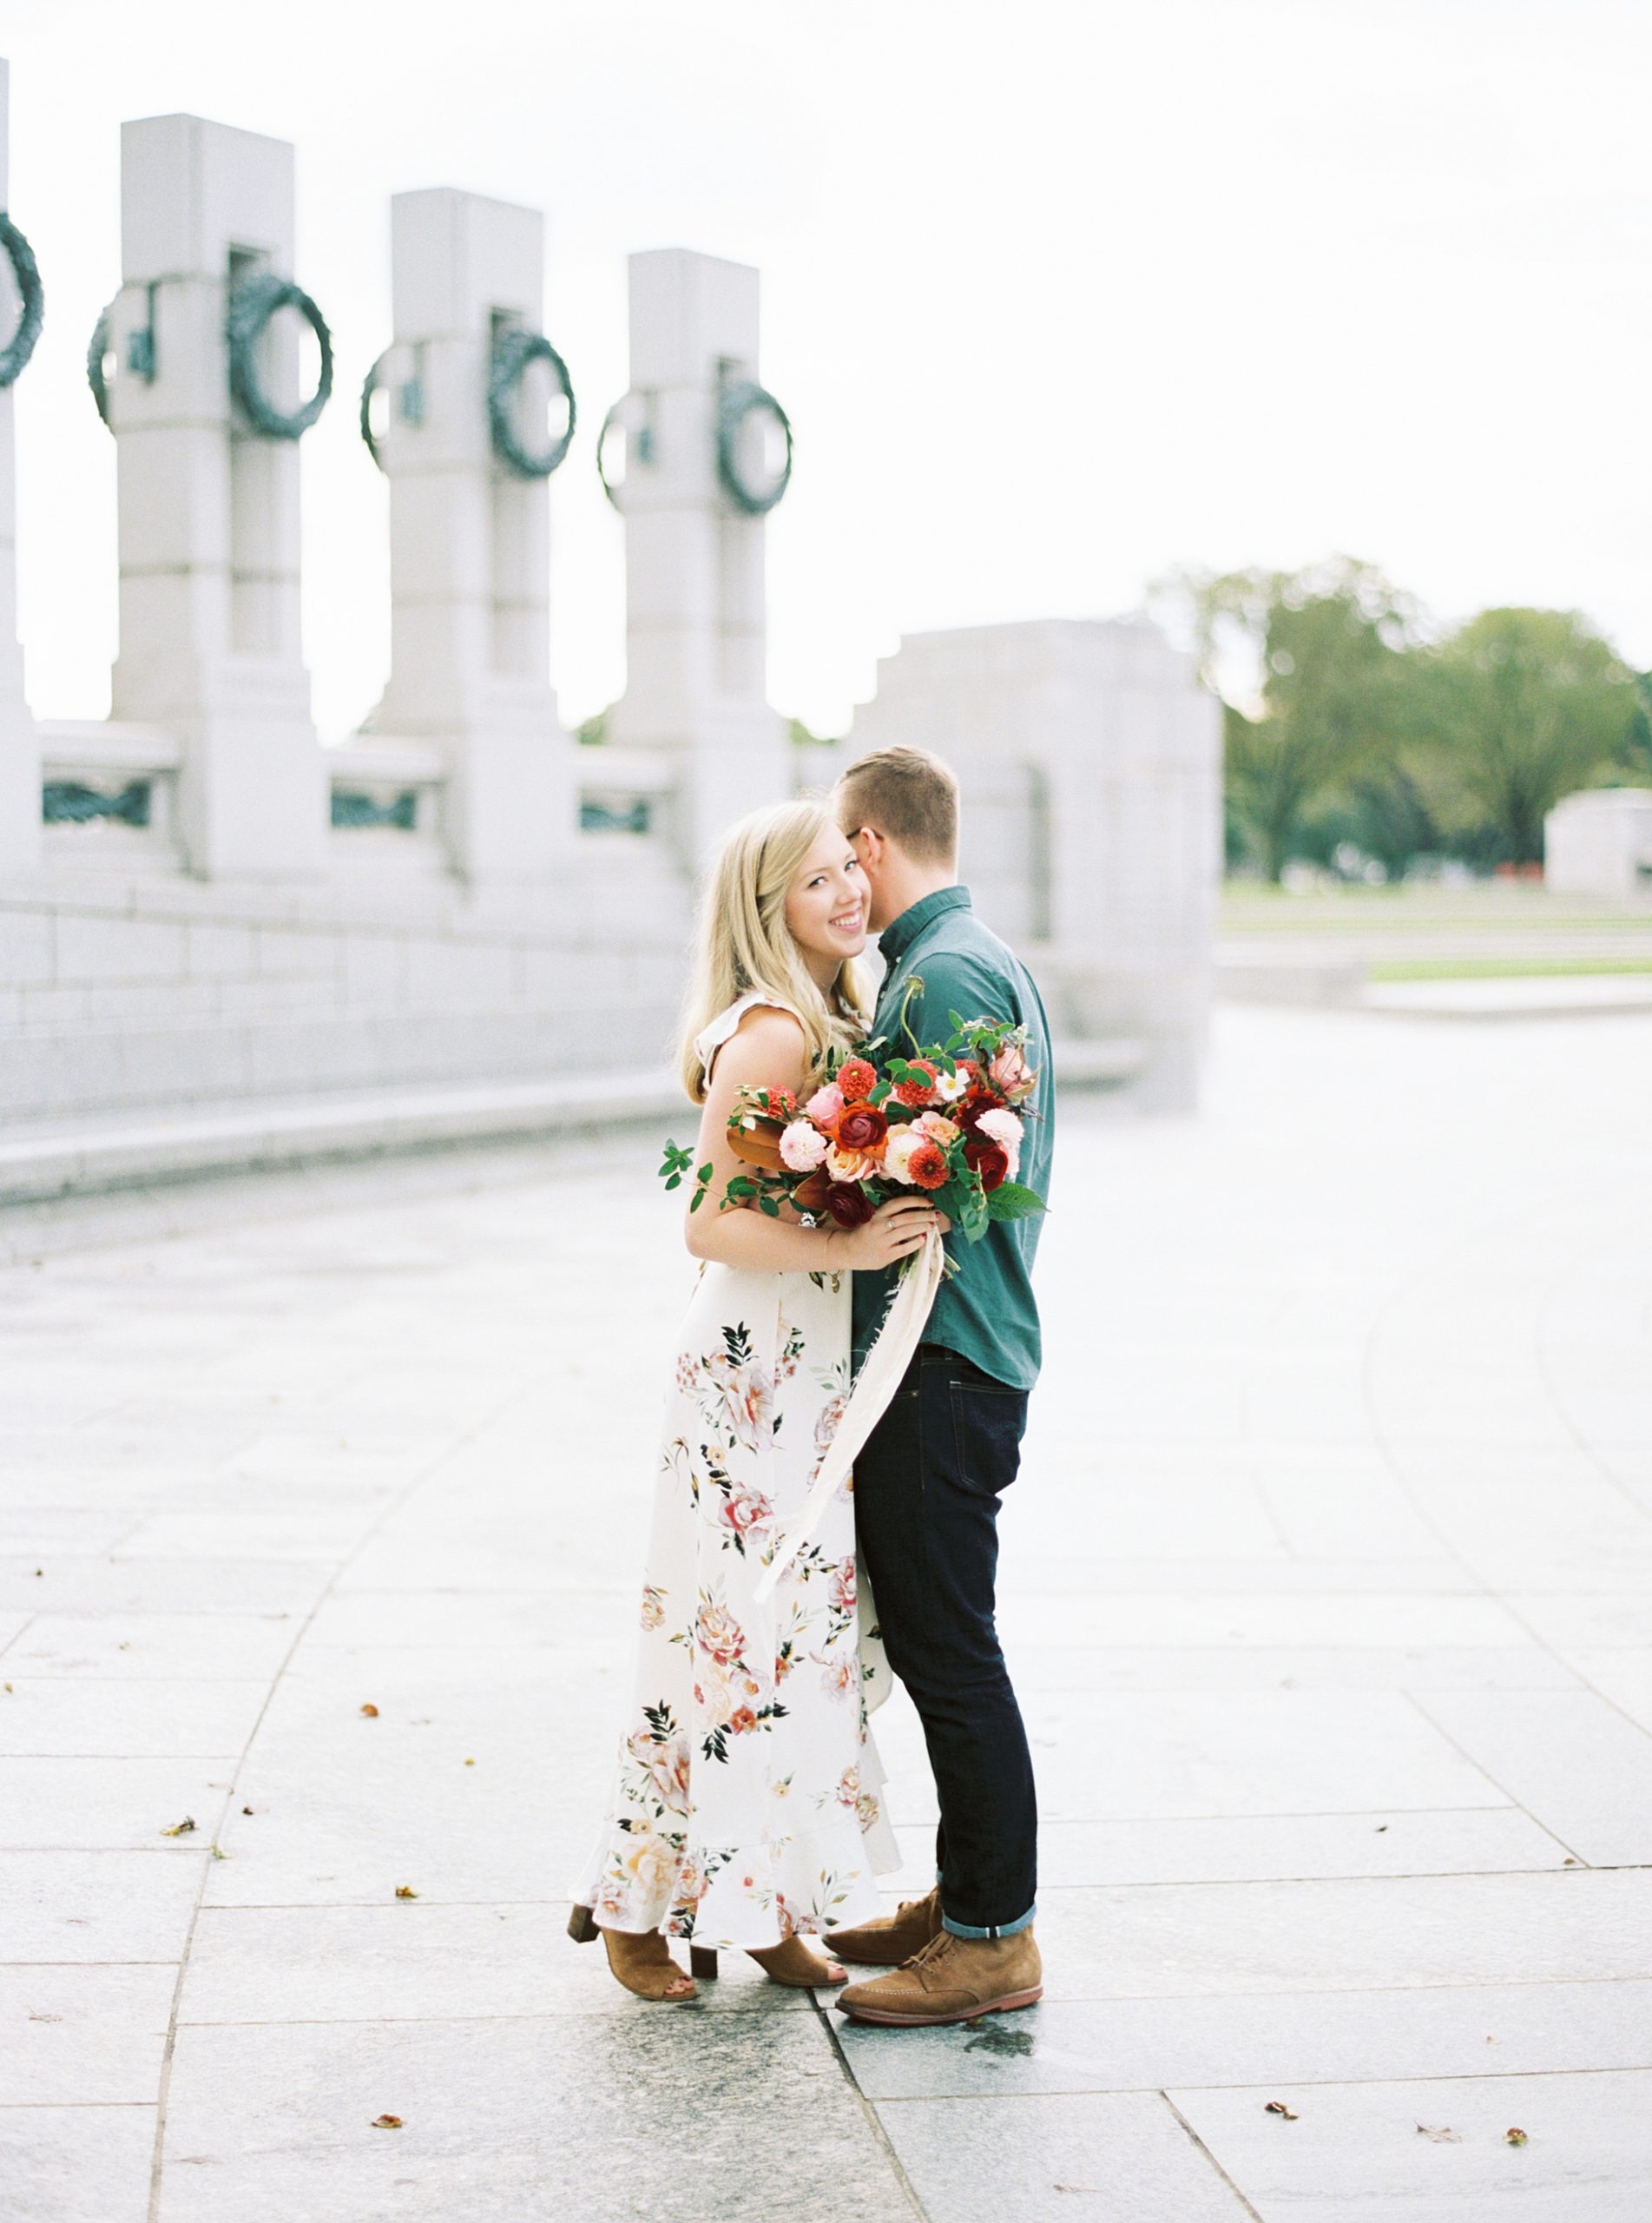 wwii memorial dc engagement session